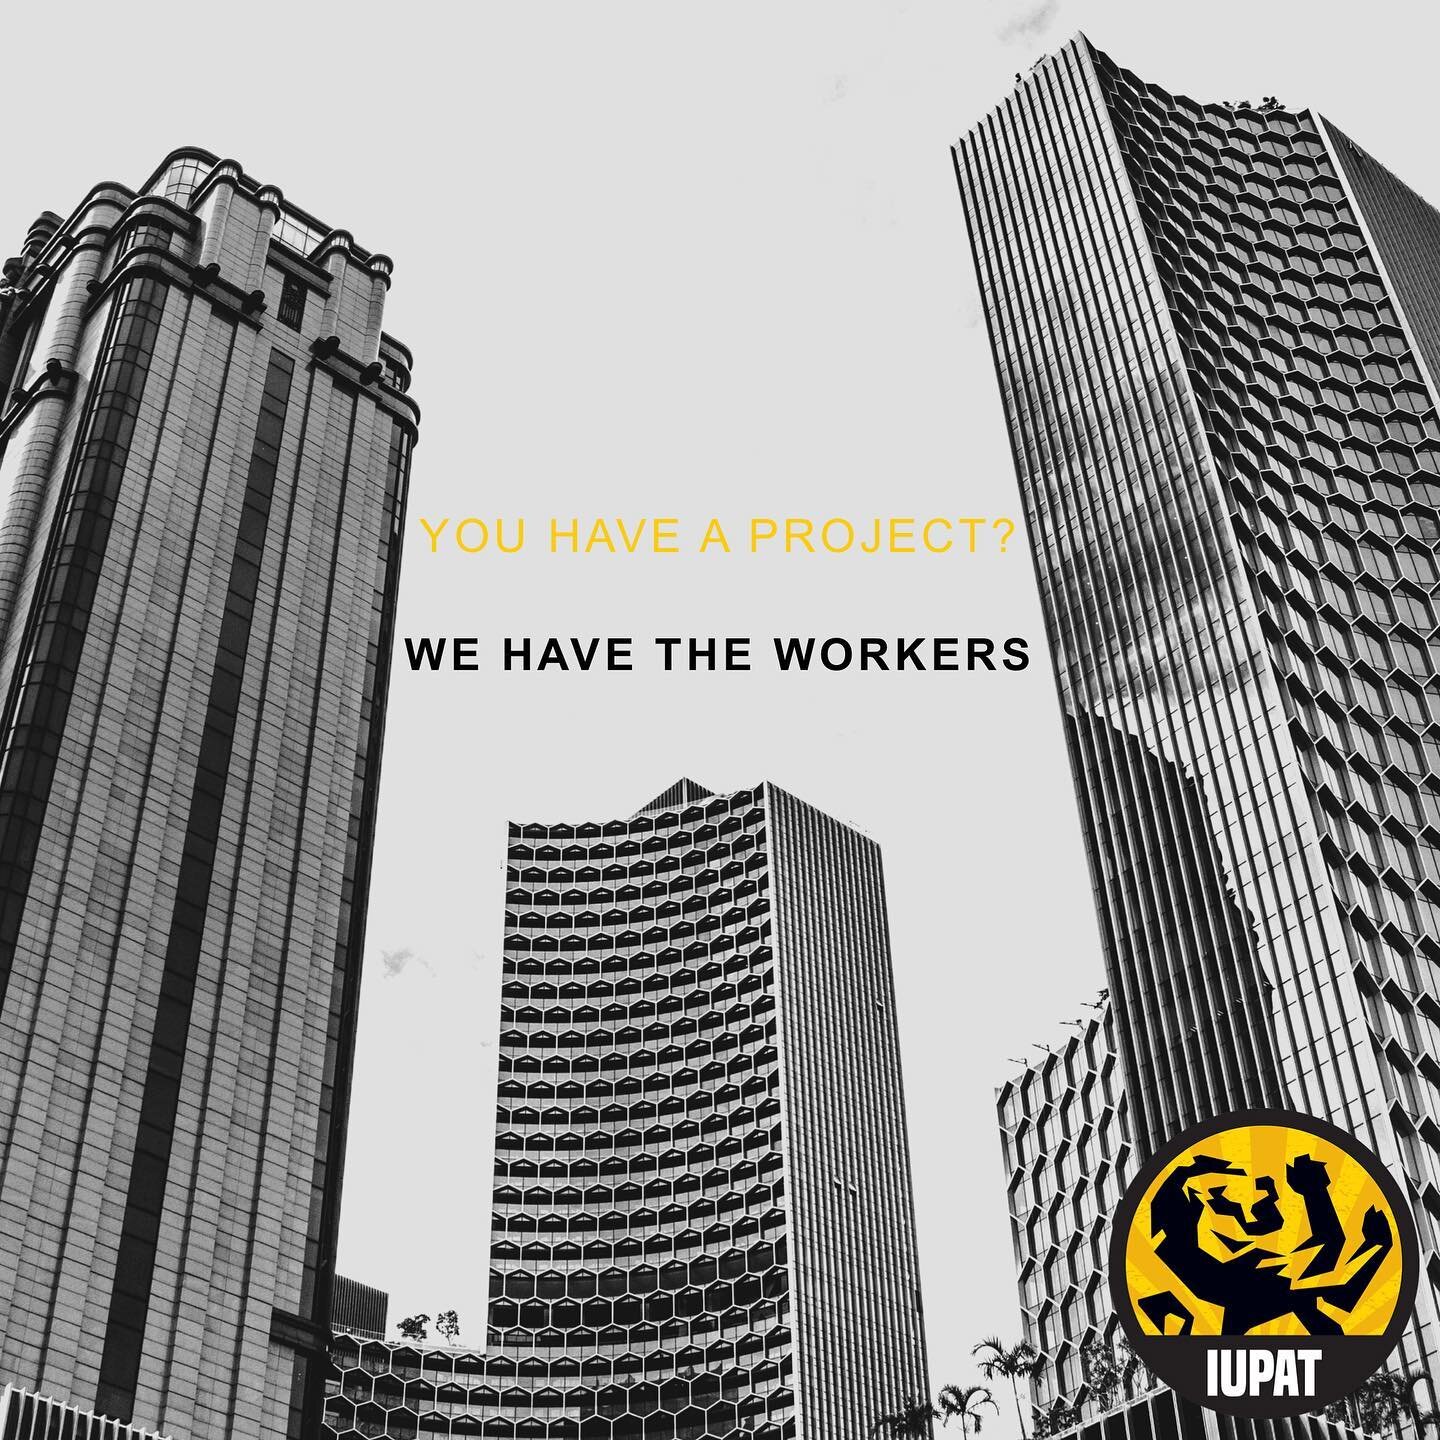 No matter the project size we have skilled workers for the job! From painters, to glaziers, to floor layers, and drywall finishers, DC88 has you covered.